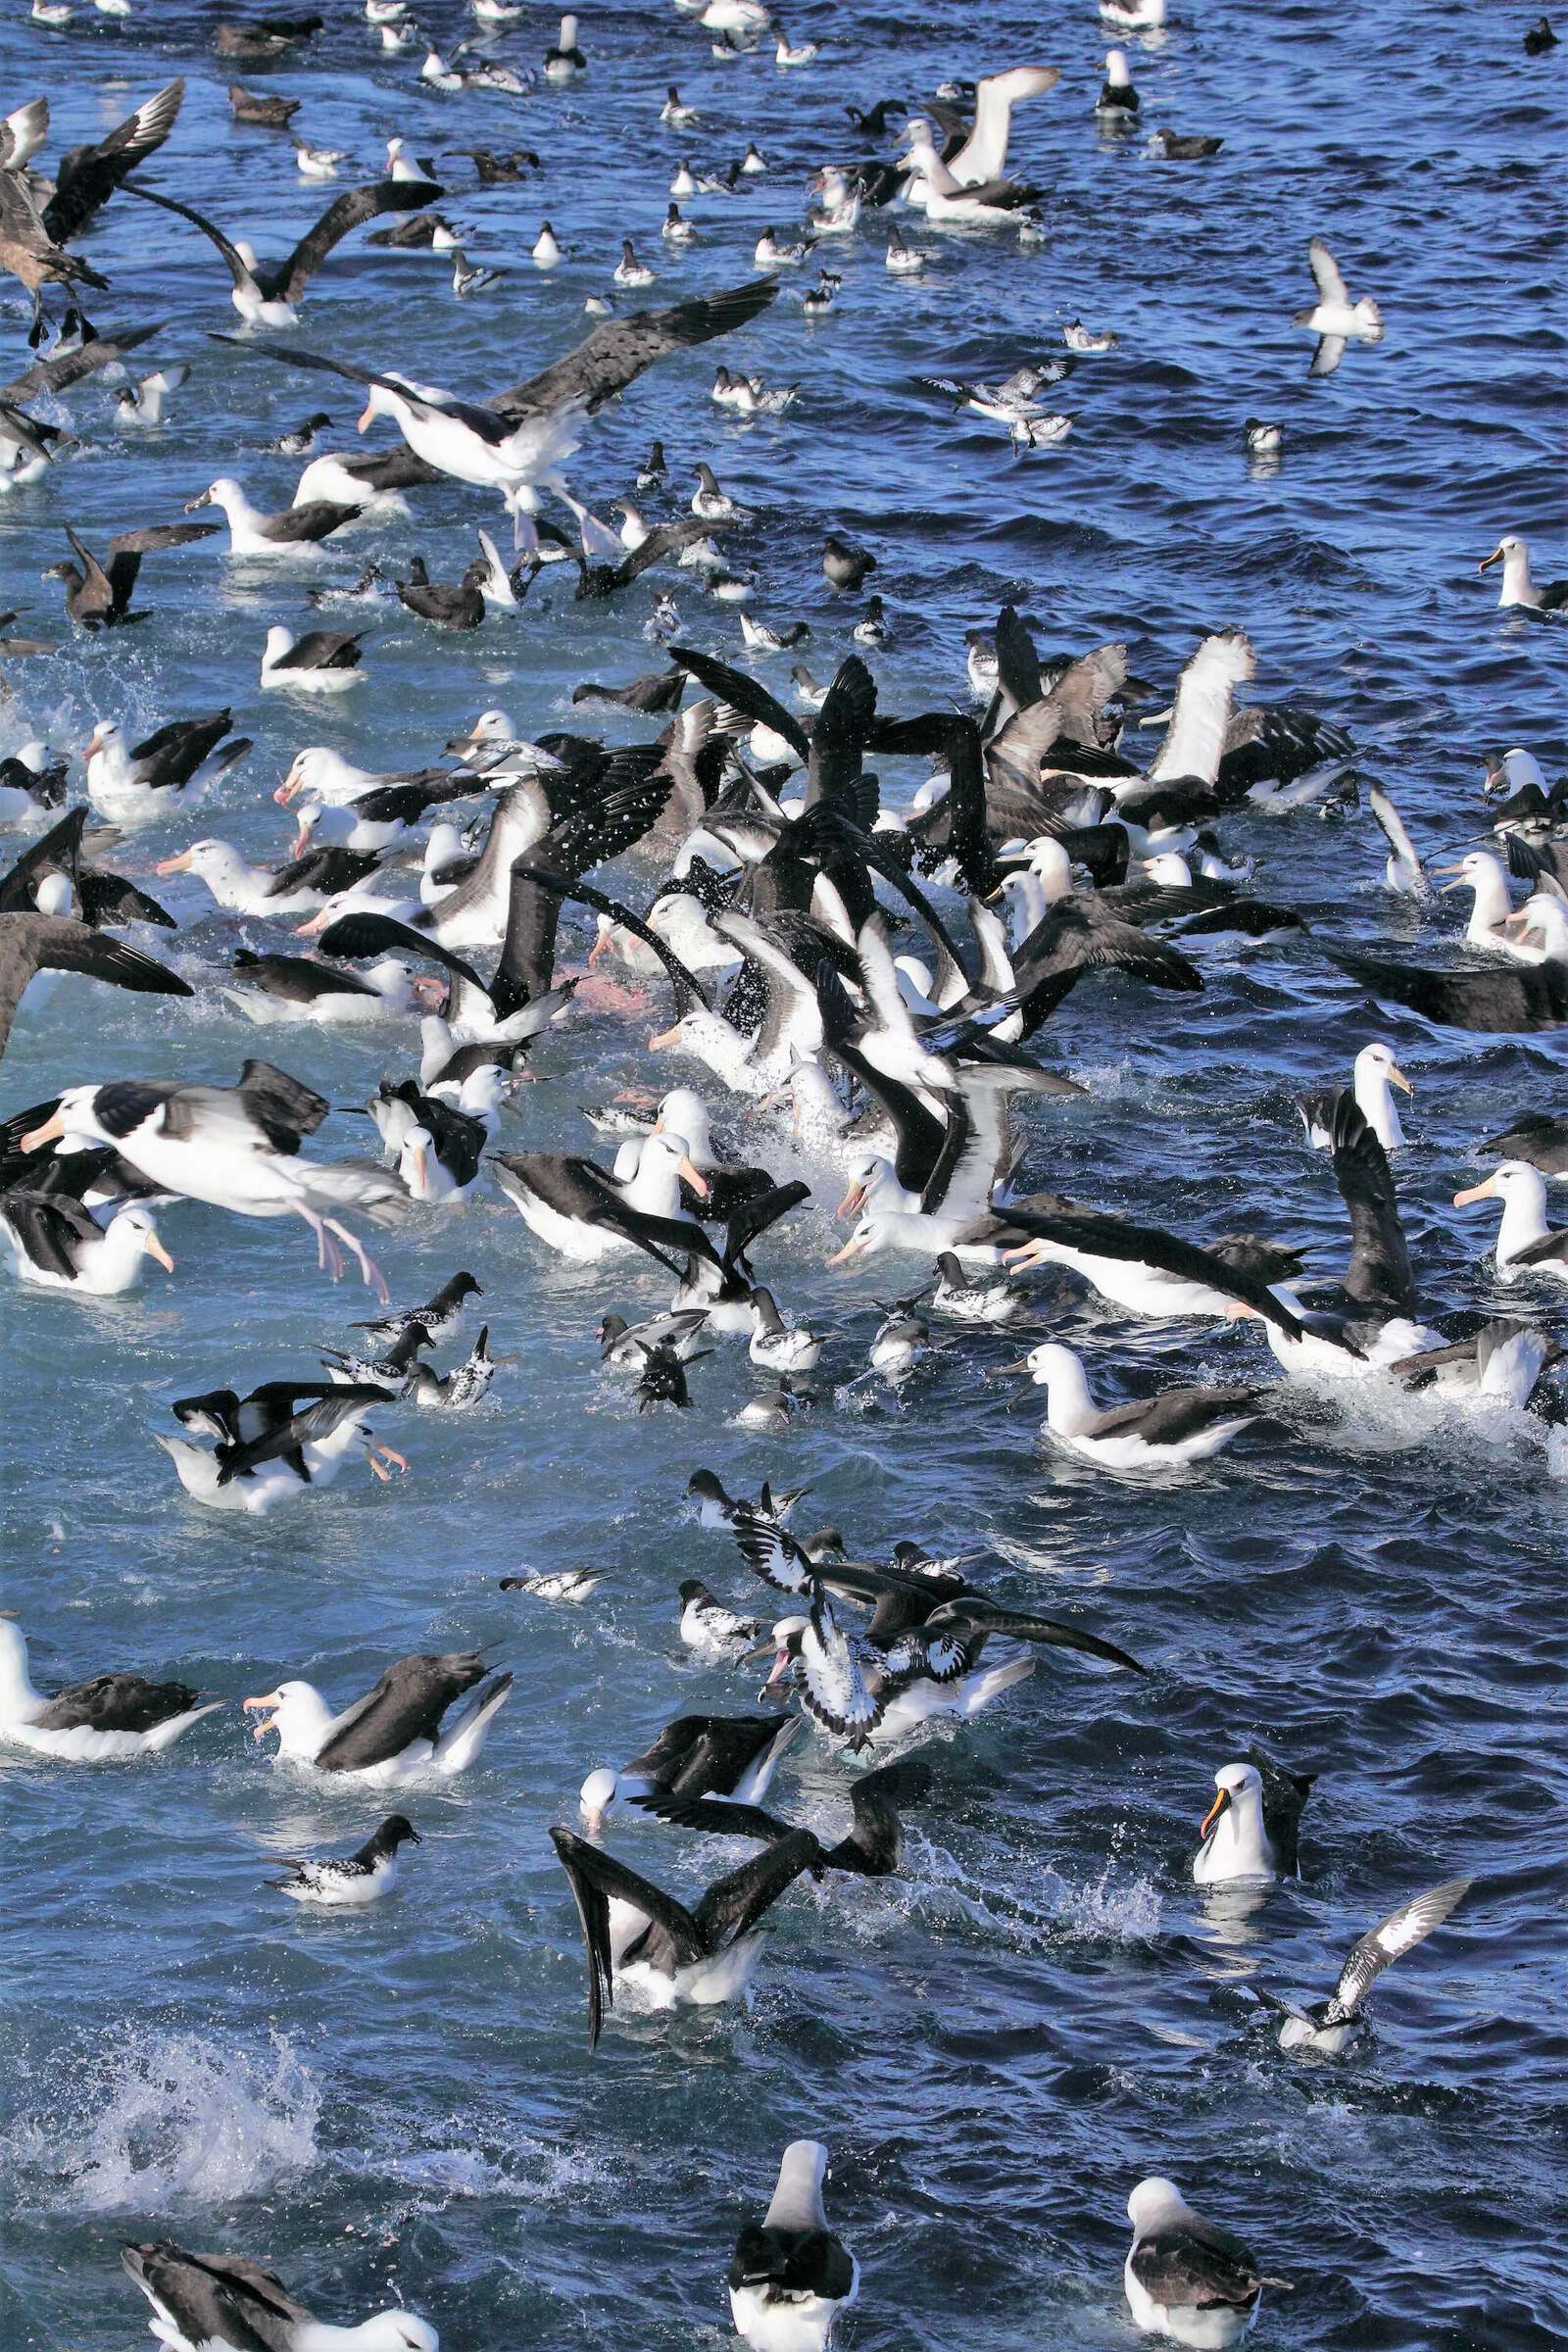 A huge mass of seabirds, some flying, some of the sea surface.